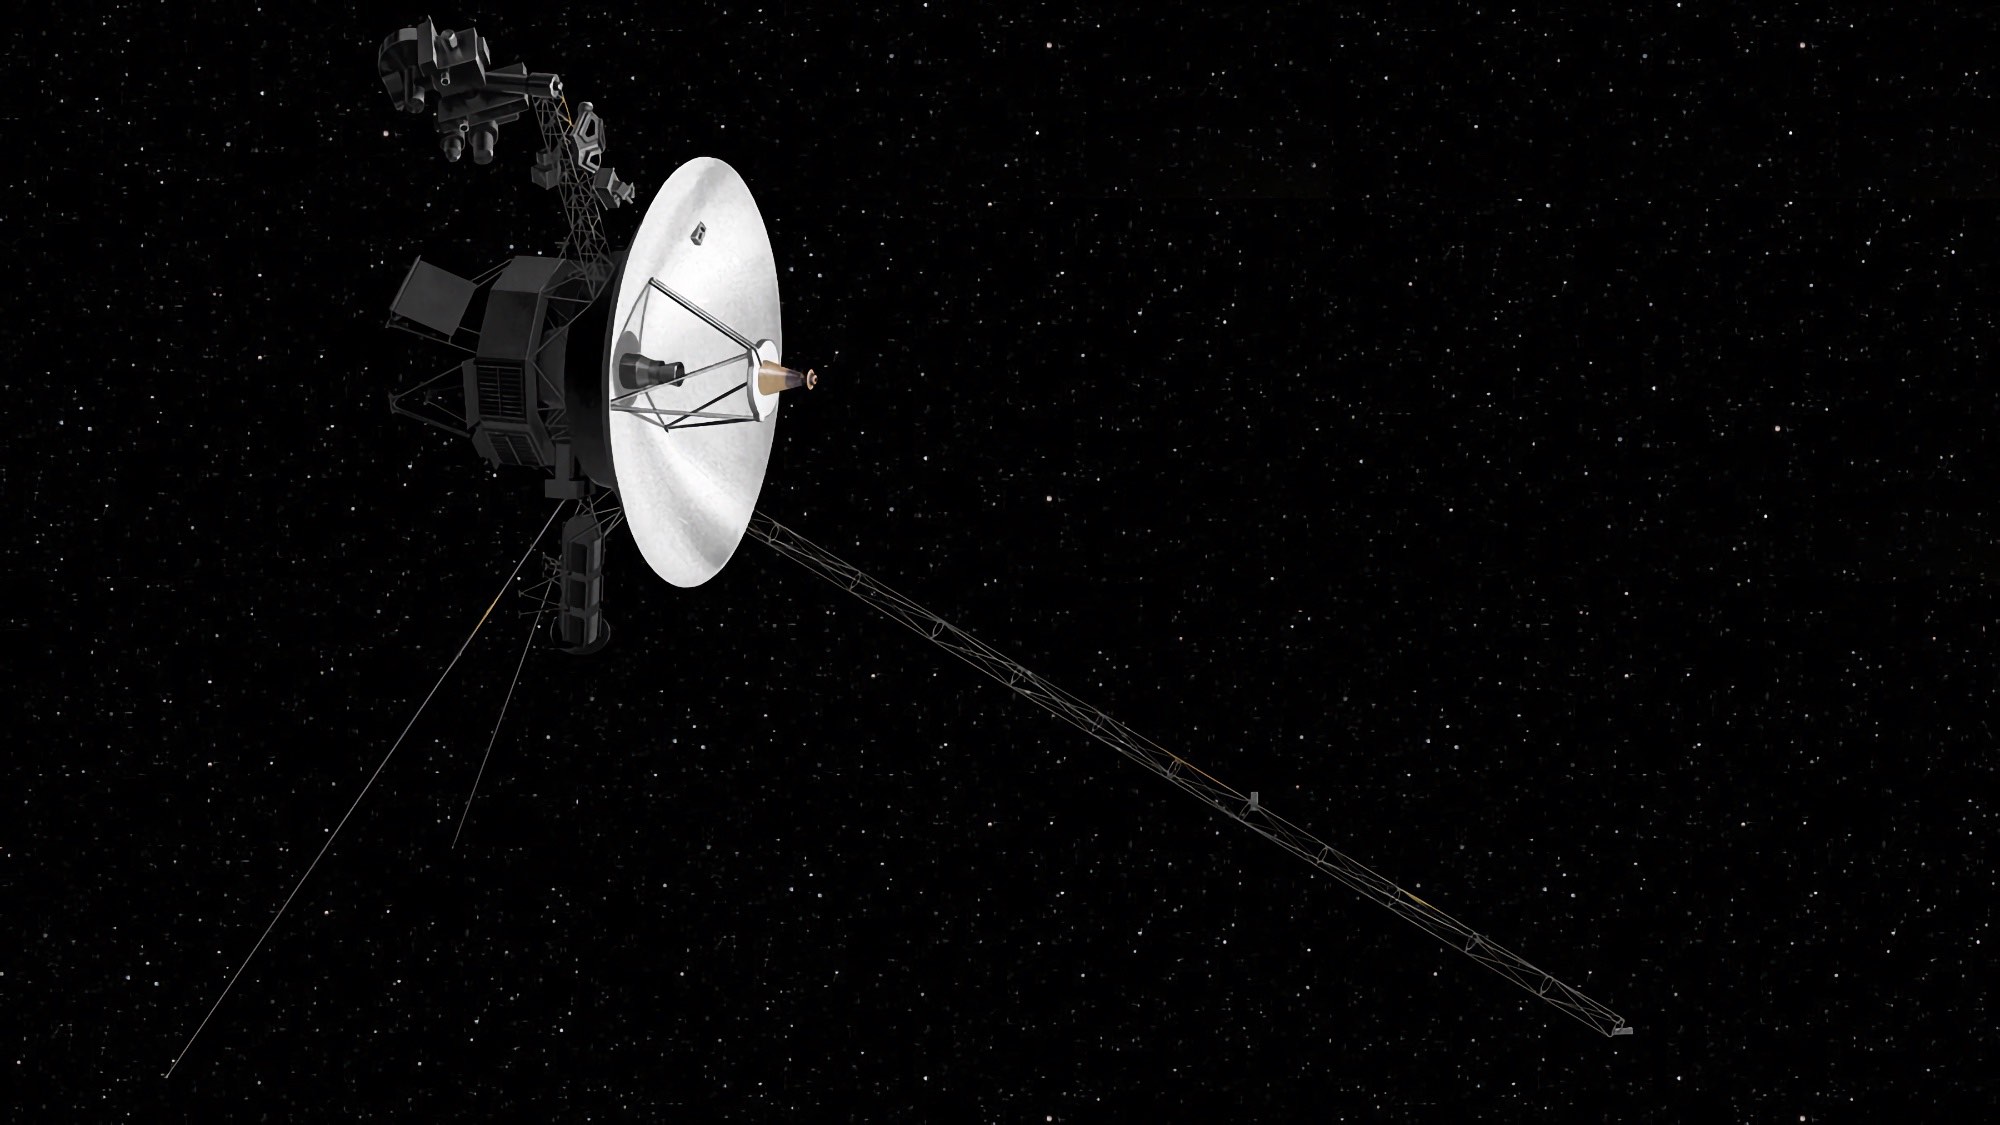 NASA is working to extend the life of Voyager 2. The space probe’s instruments can now operate until 2026.